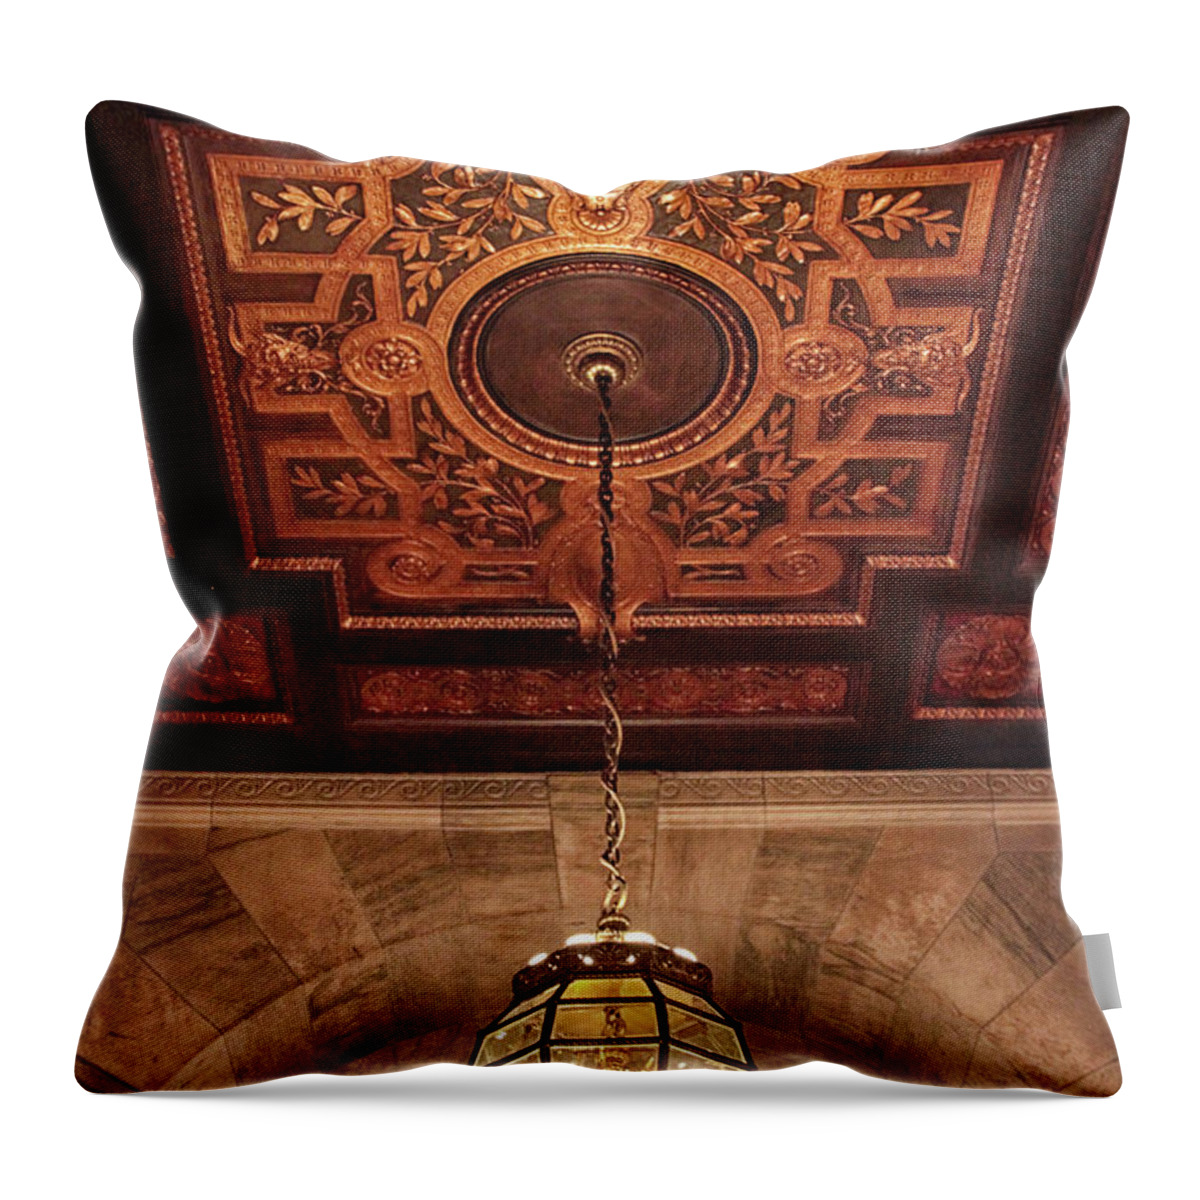 New York Public Library Throw Pillow featuring the photograph Library Light by Jessica Jenney